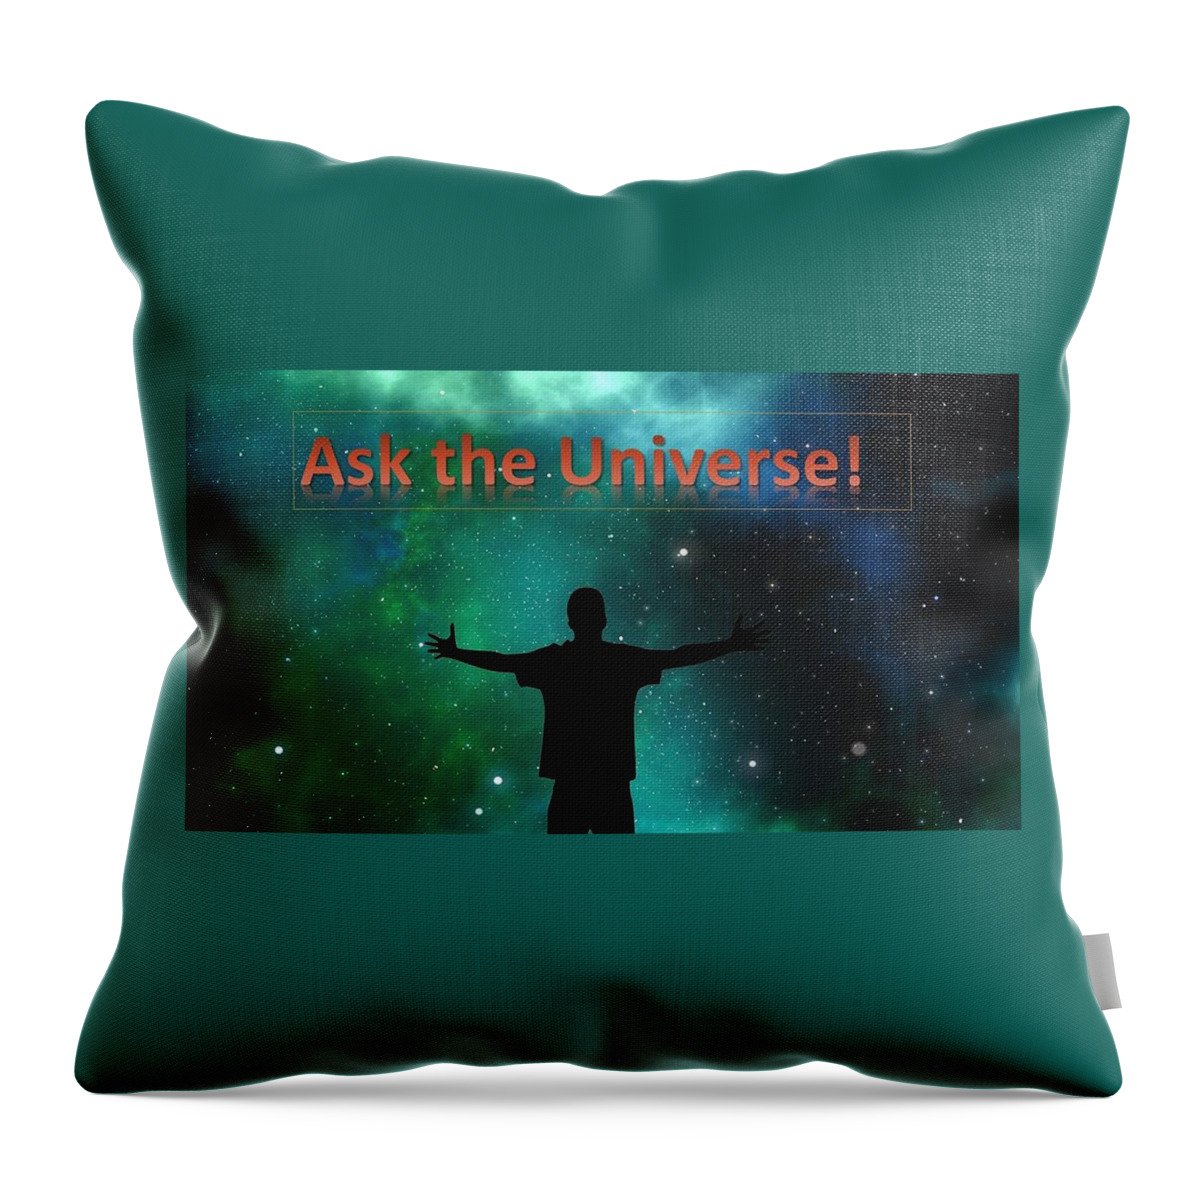 Sky Throw Pillow featuring the digital art Ask The Universe by Nancy Ayanna Wyatt